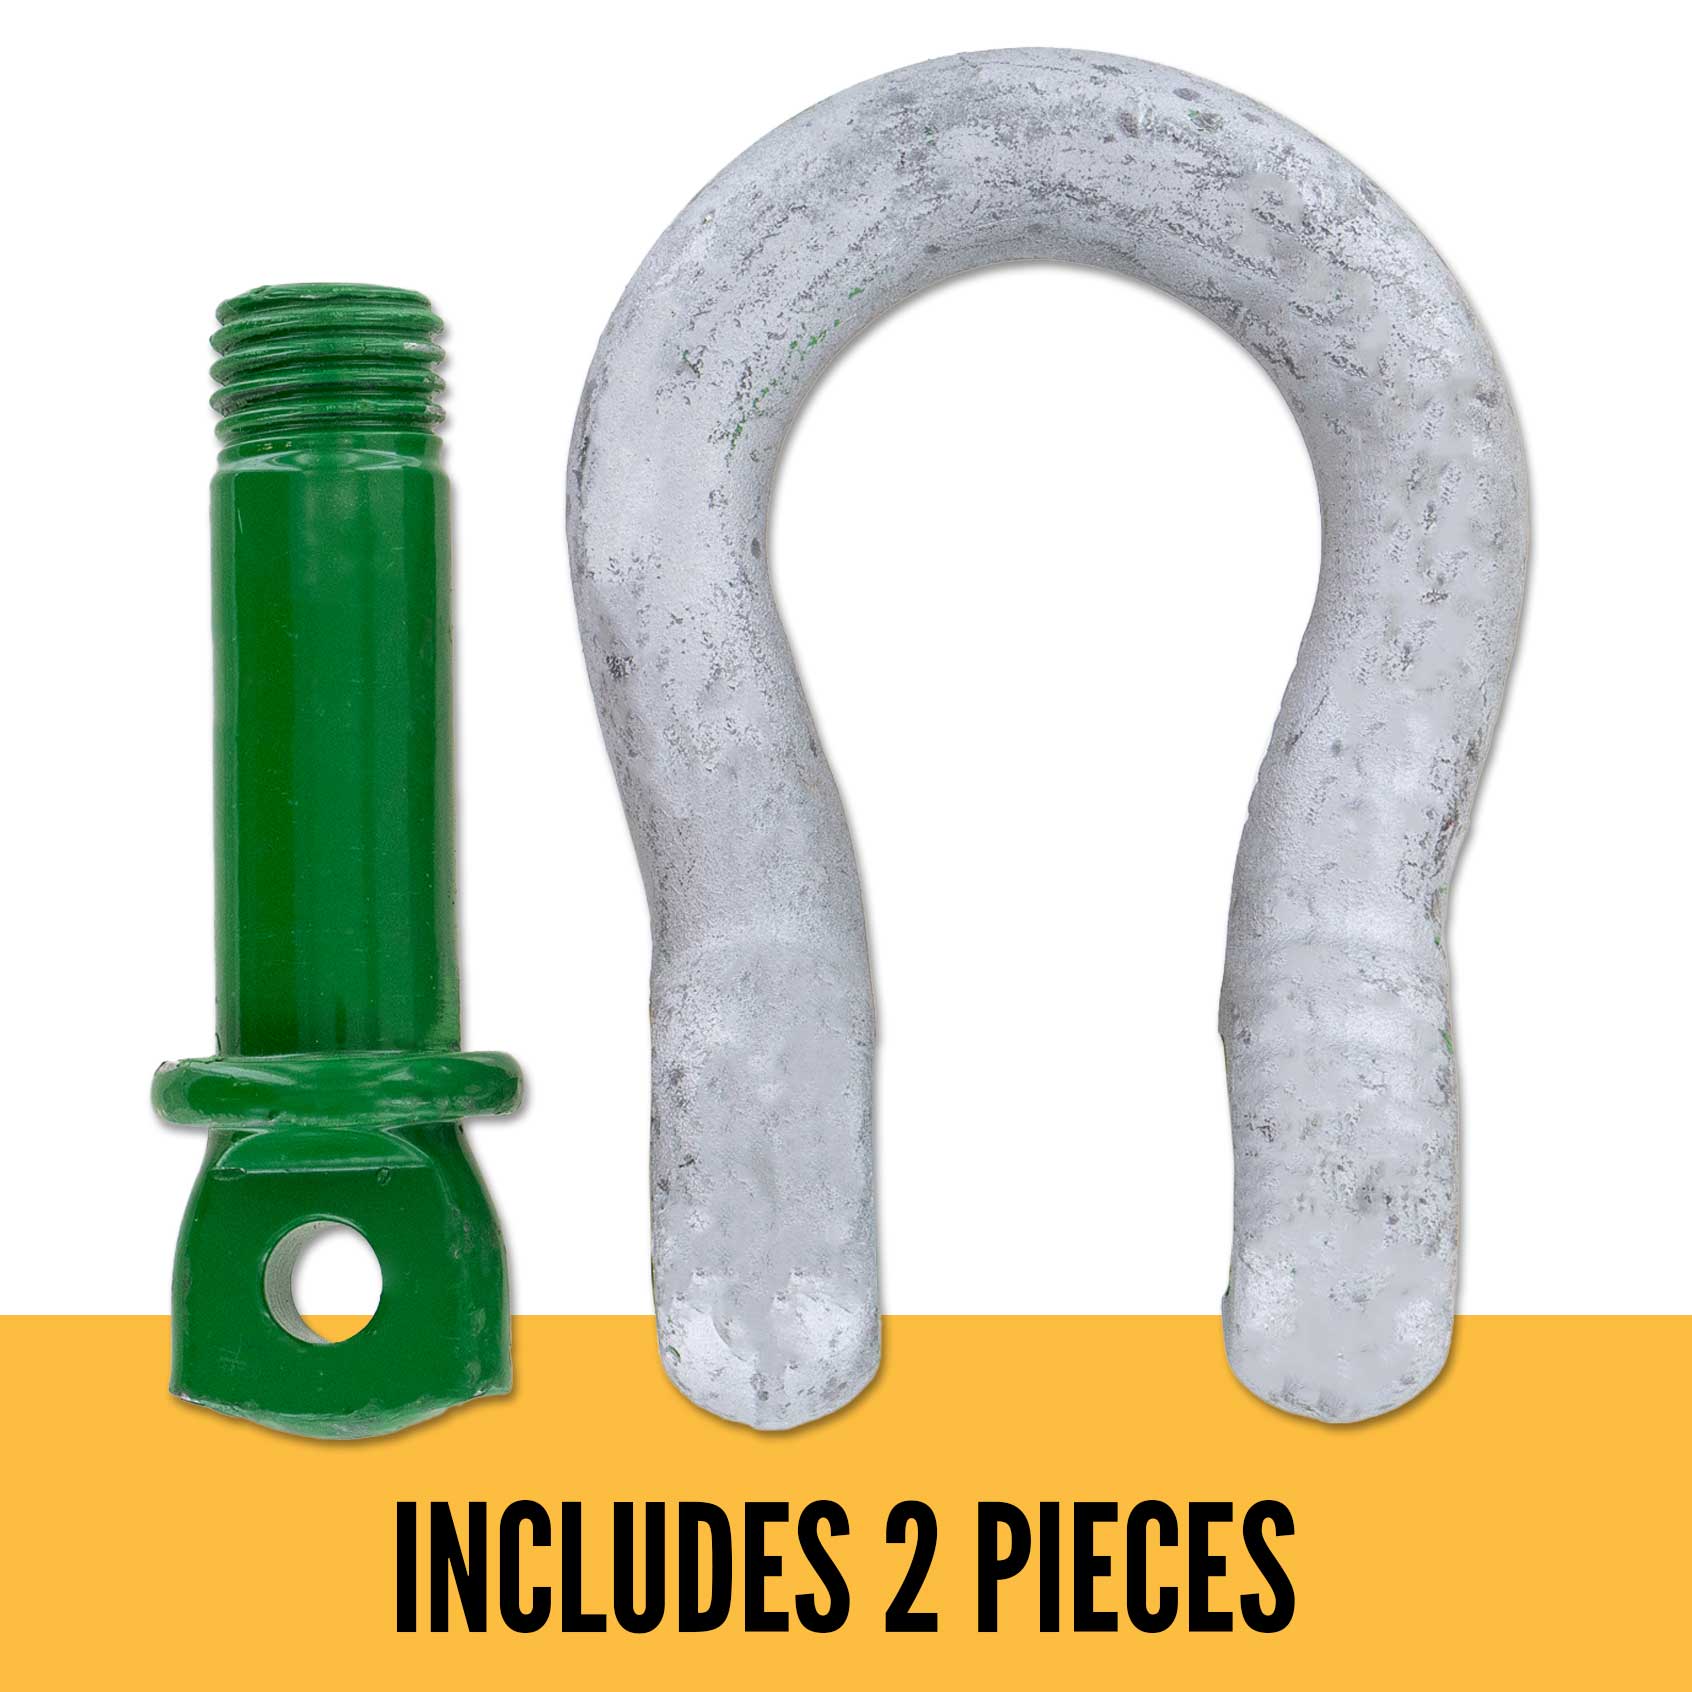 1" Van Beest Green Pin® Screw Pin Anchor Shackle | G-4161 - 8.5 Ton parts of a shackle